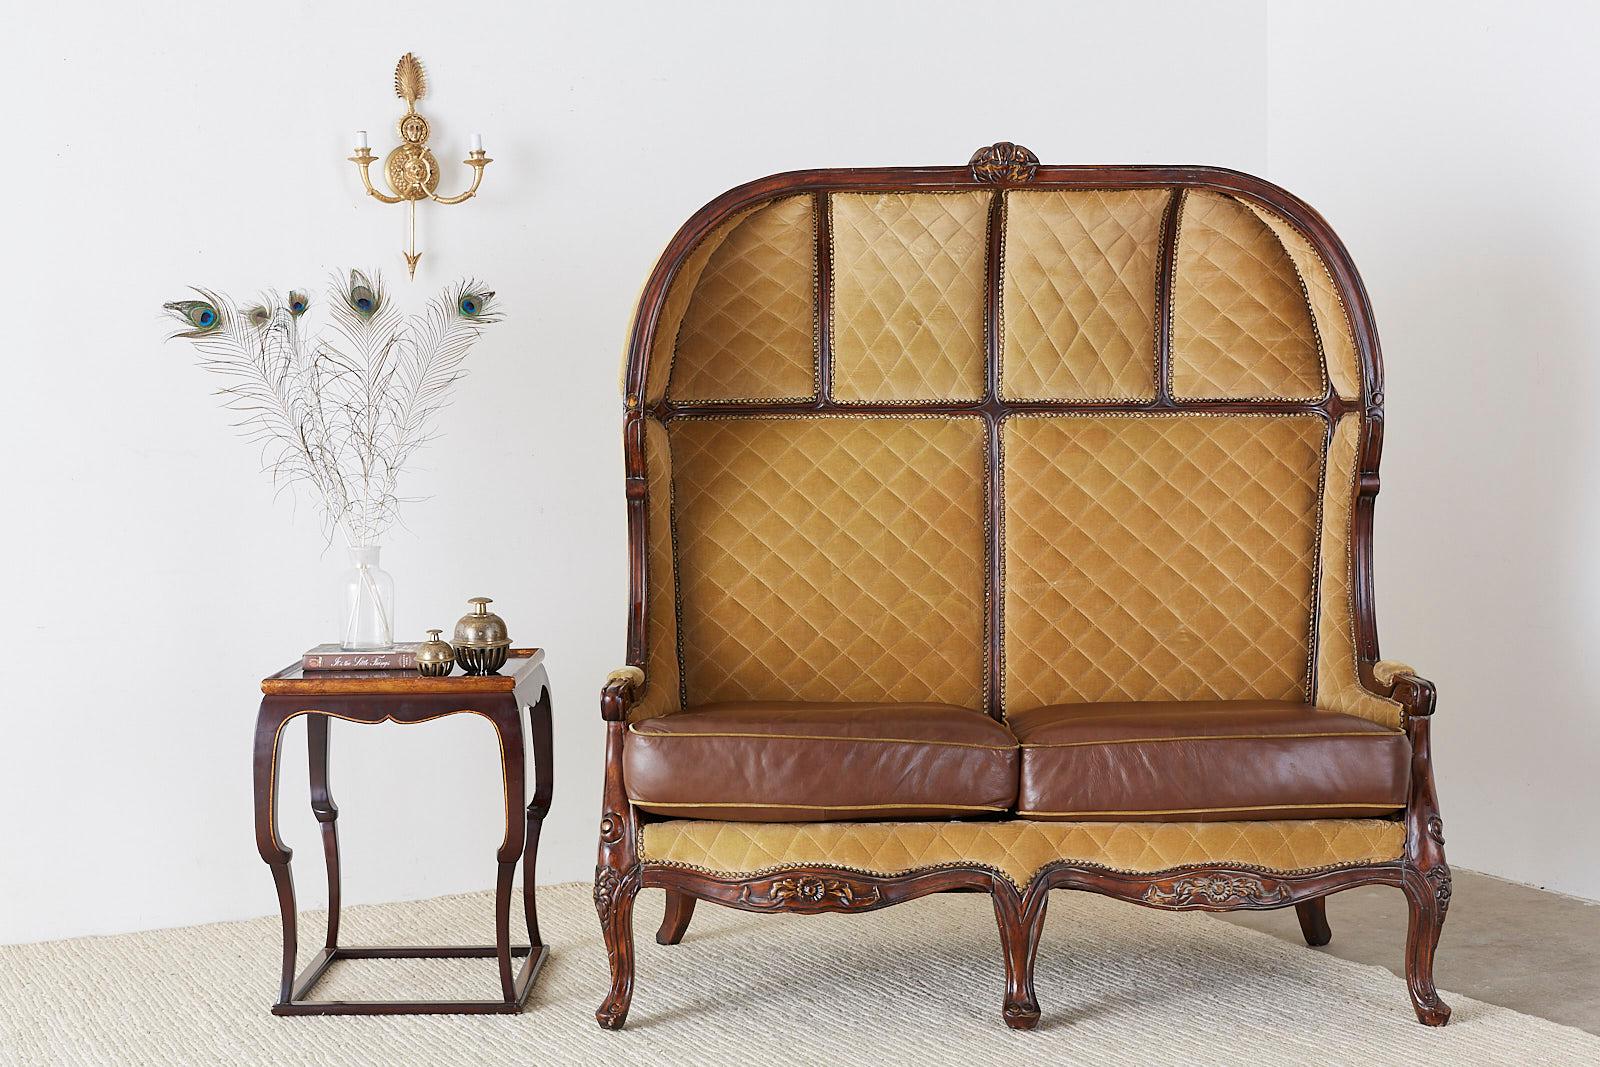 impressive porter's settee or canopy settee constructed from mahogany in the English regency taste. Features a beautifully hand carved hooded frame upholstered with quilted velvet bordered by fancy brass tack nail head trim. The seat is fitted with